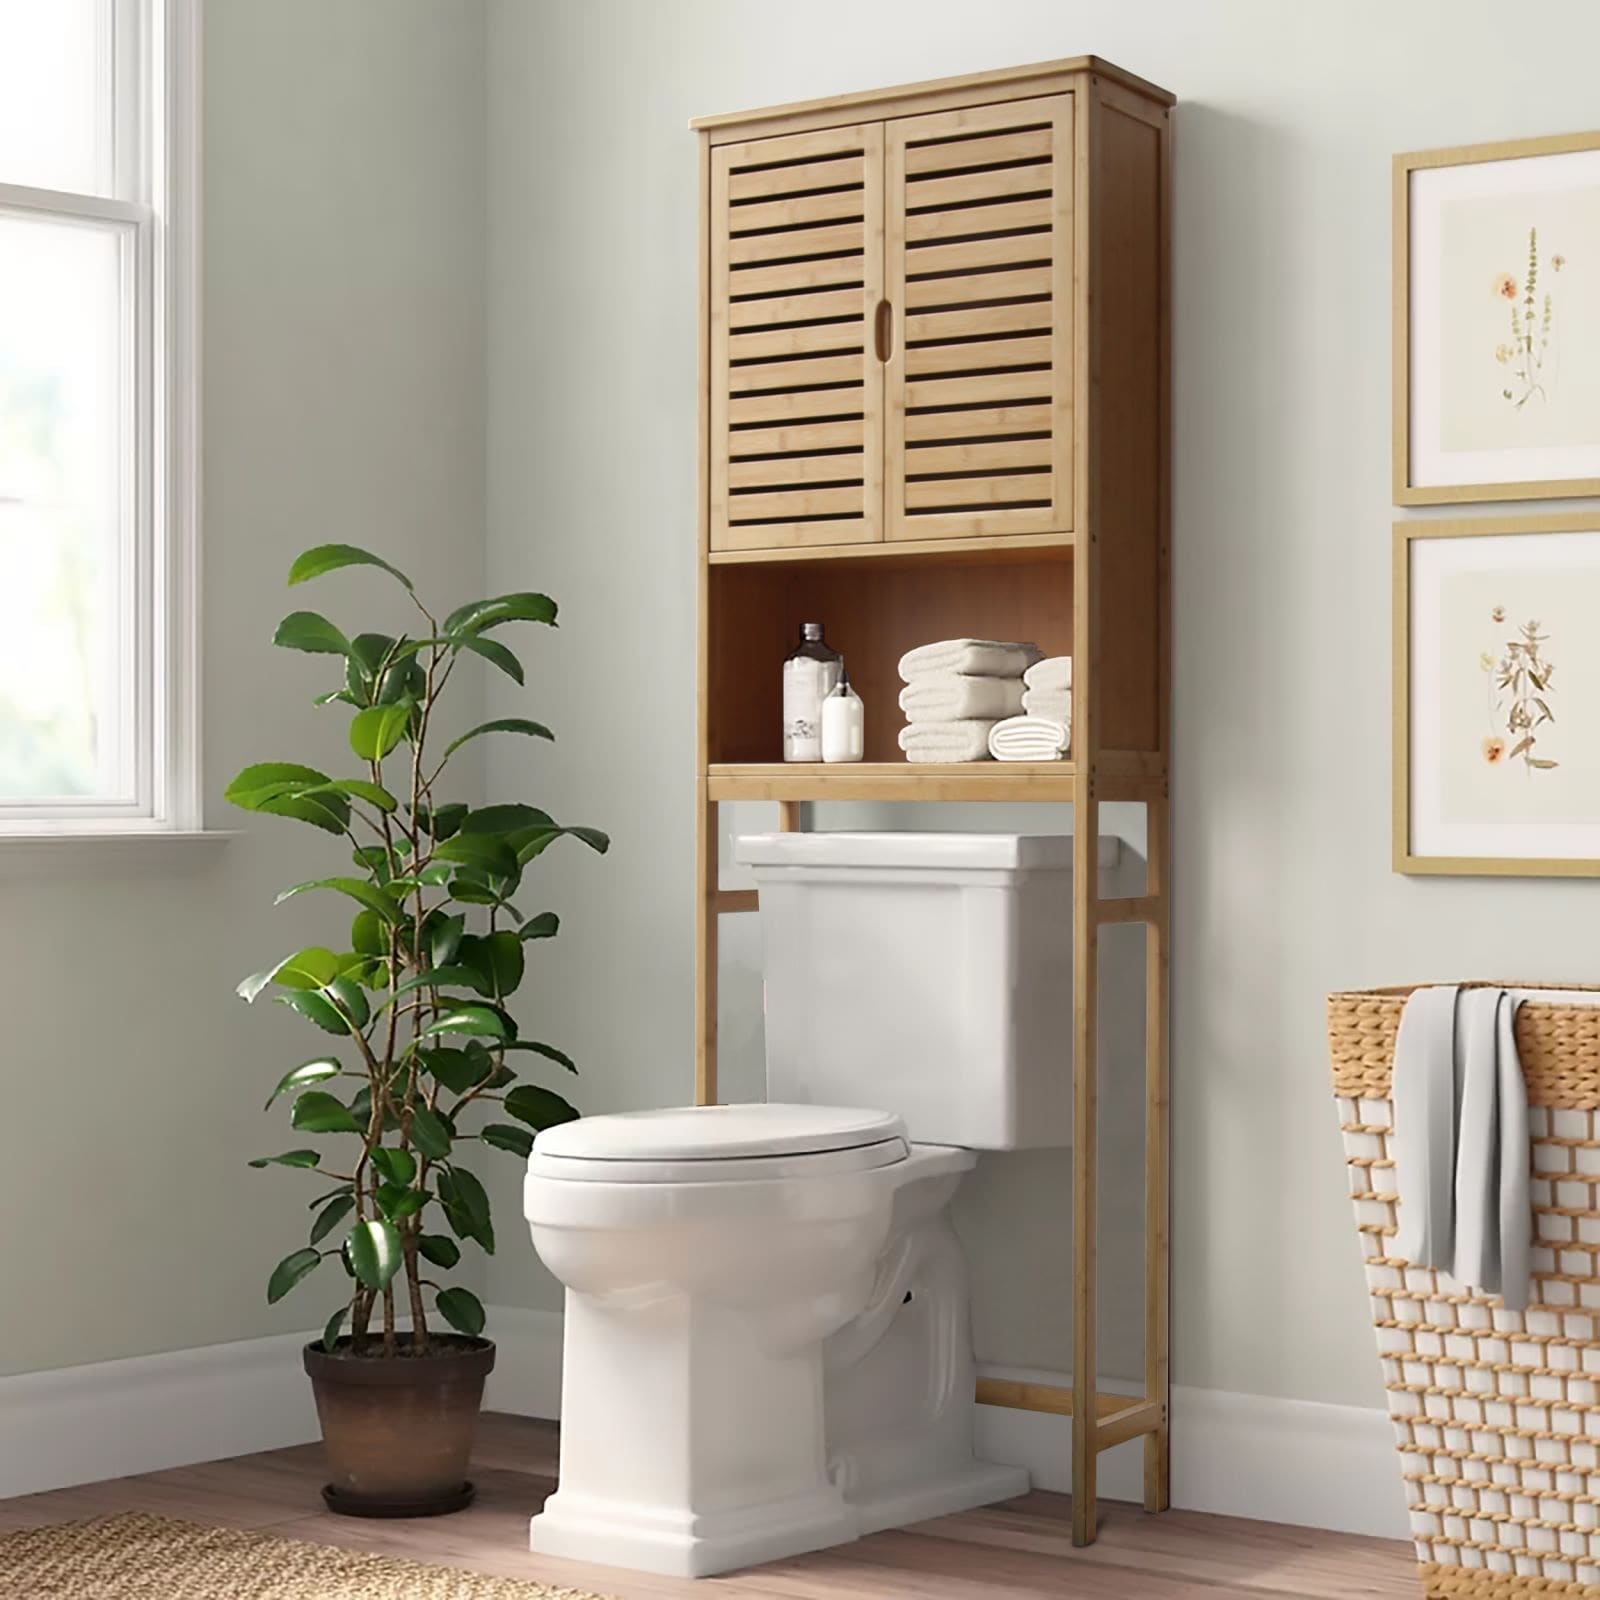 https://ak1.ostkcdn.com/images/products/is/images/direct/579c740b6b8fceb3834af84756fe17586dbc6355/VEIKOUS-Over-The-Toilet-Storage-Cabinet-Bathroom-Organizer-with-Shelf-and-Cupboard.jpg